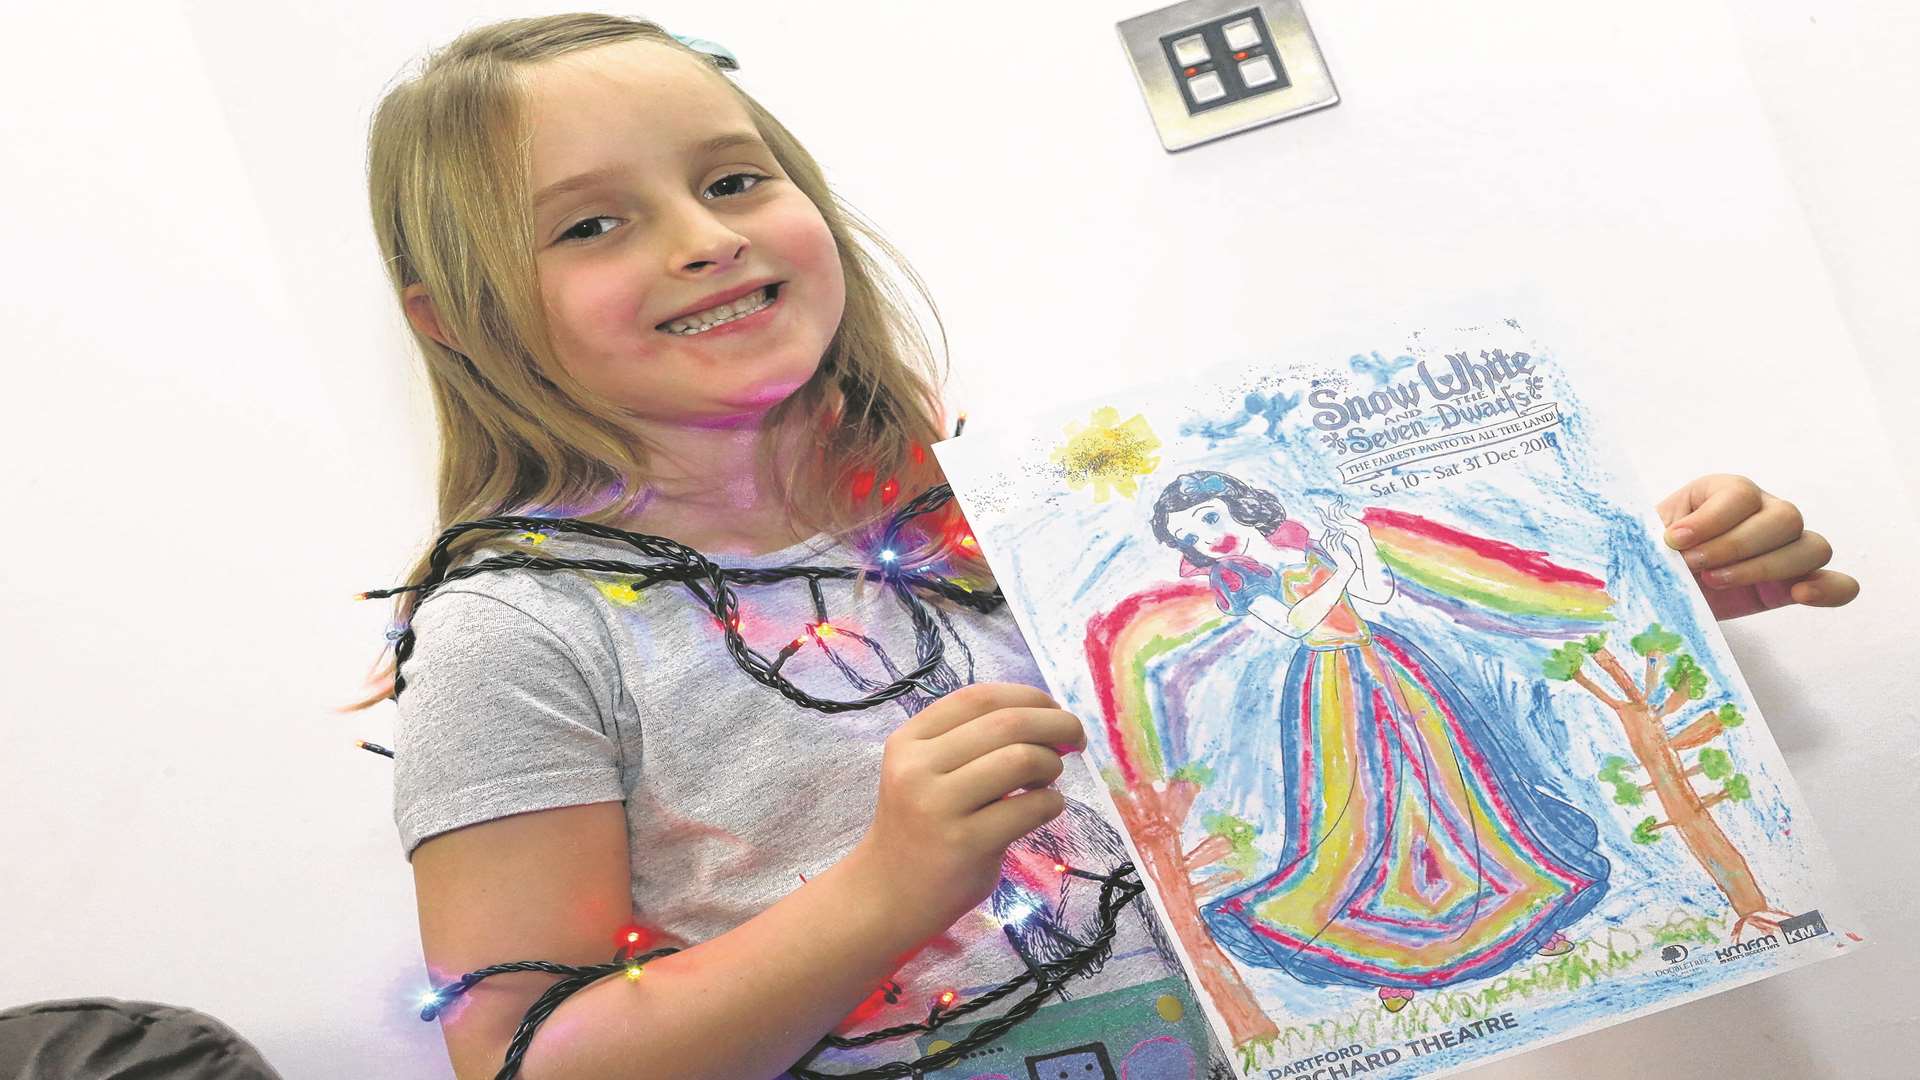 Olivia Moss, shows off her winning picture entry, colouring in competition sponsored by The Orchard Theatre. The six year old won the prize of switching on Dartford's Christmas lights.